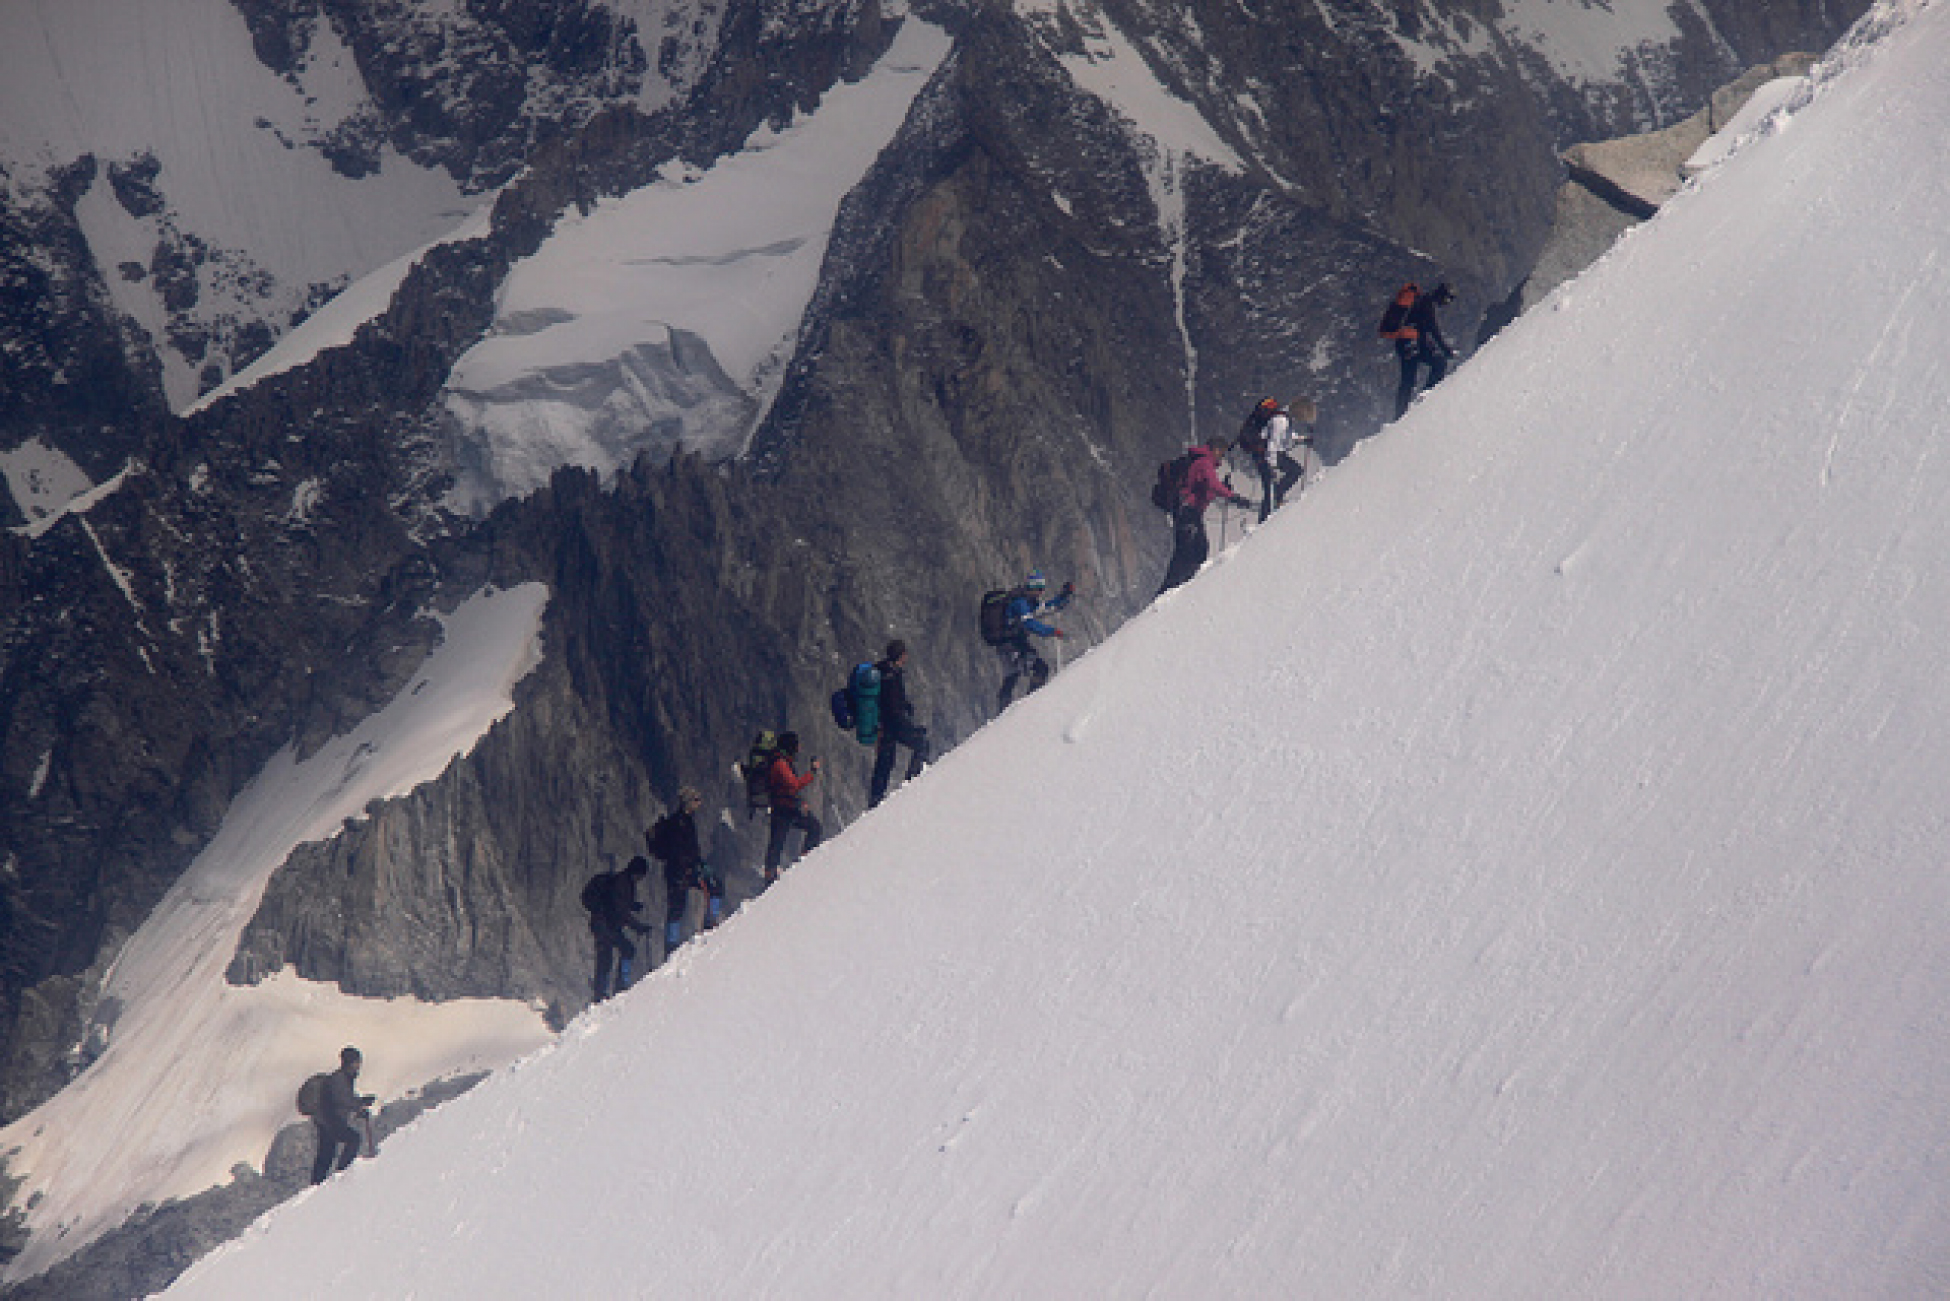 This photo shows a group of people climbing a mountain.